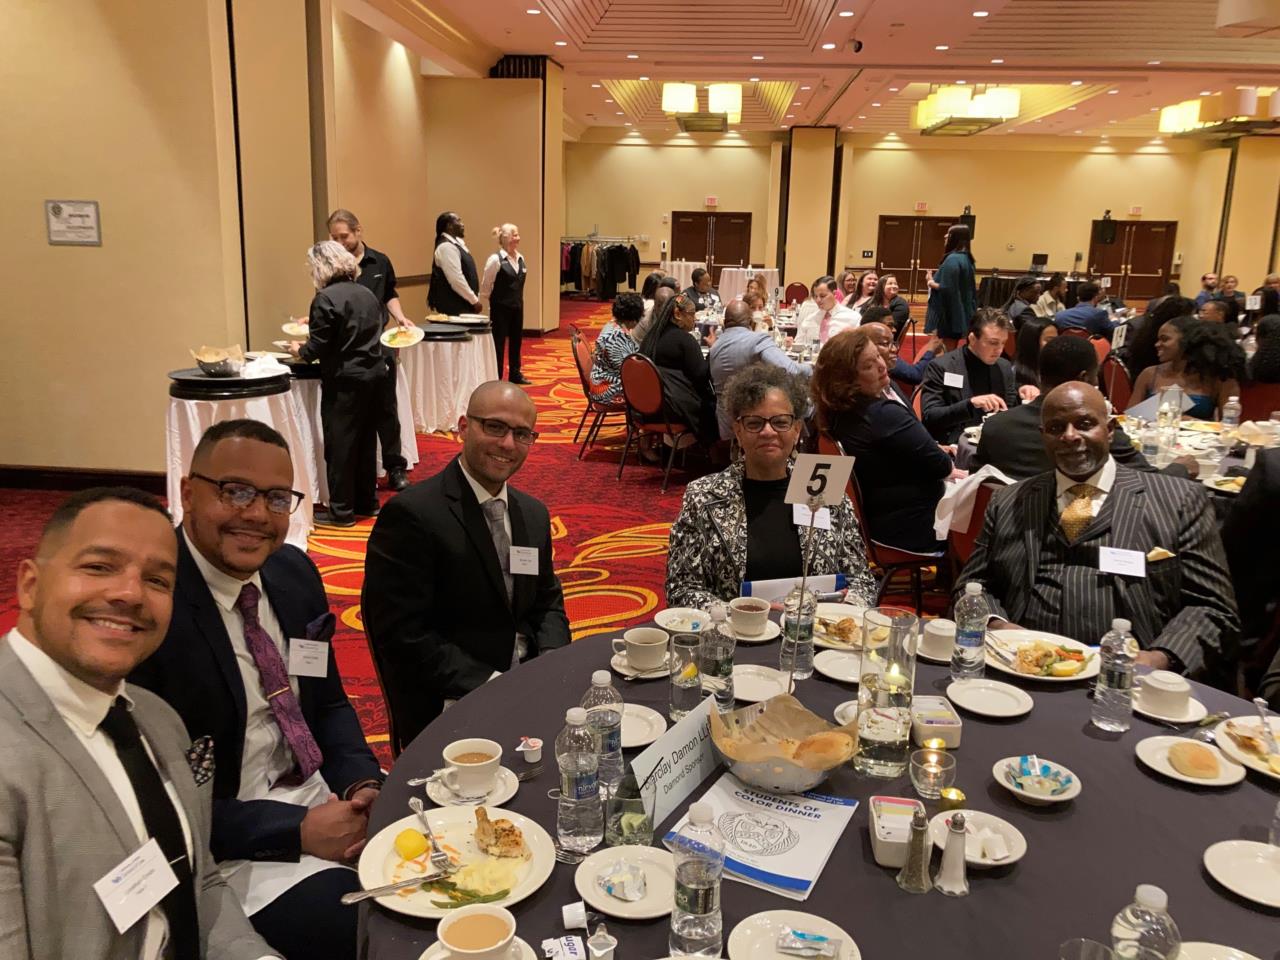 On April 14, 2022, Oliver Young,  of counsel, Corey Auerbach, partner, Ali Fatmi, associate, Bob Heary, partner, and Brendan Diaz, summer associate, attended the University at Buffalo School of Law’s 31st Annual Students of Color Dinner.